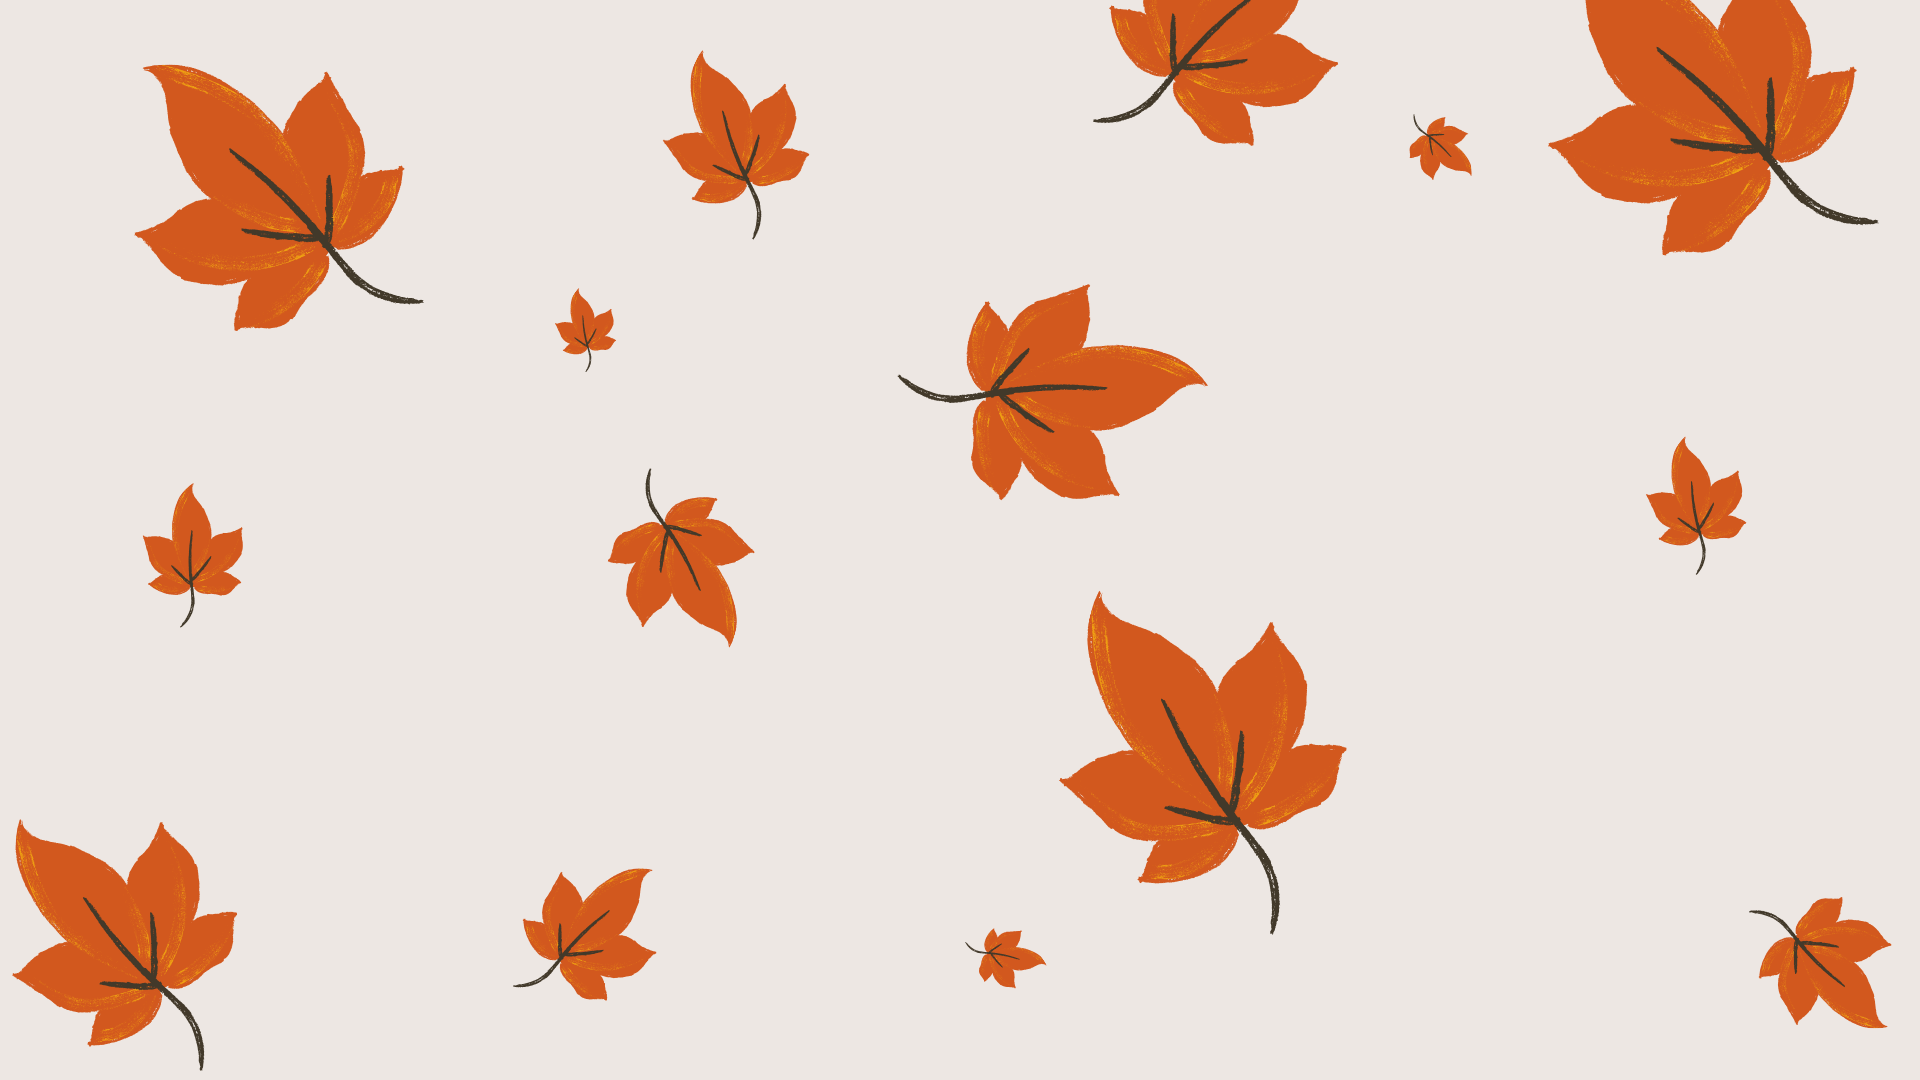 A pattern of orange leaves on white background - Cute fall